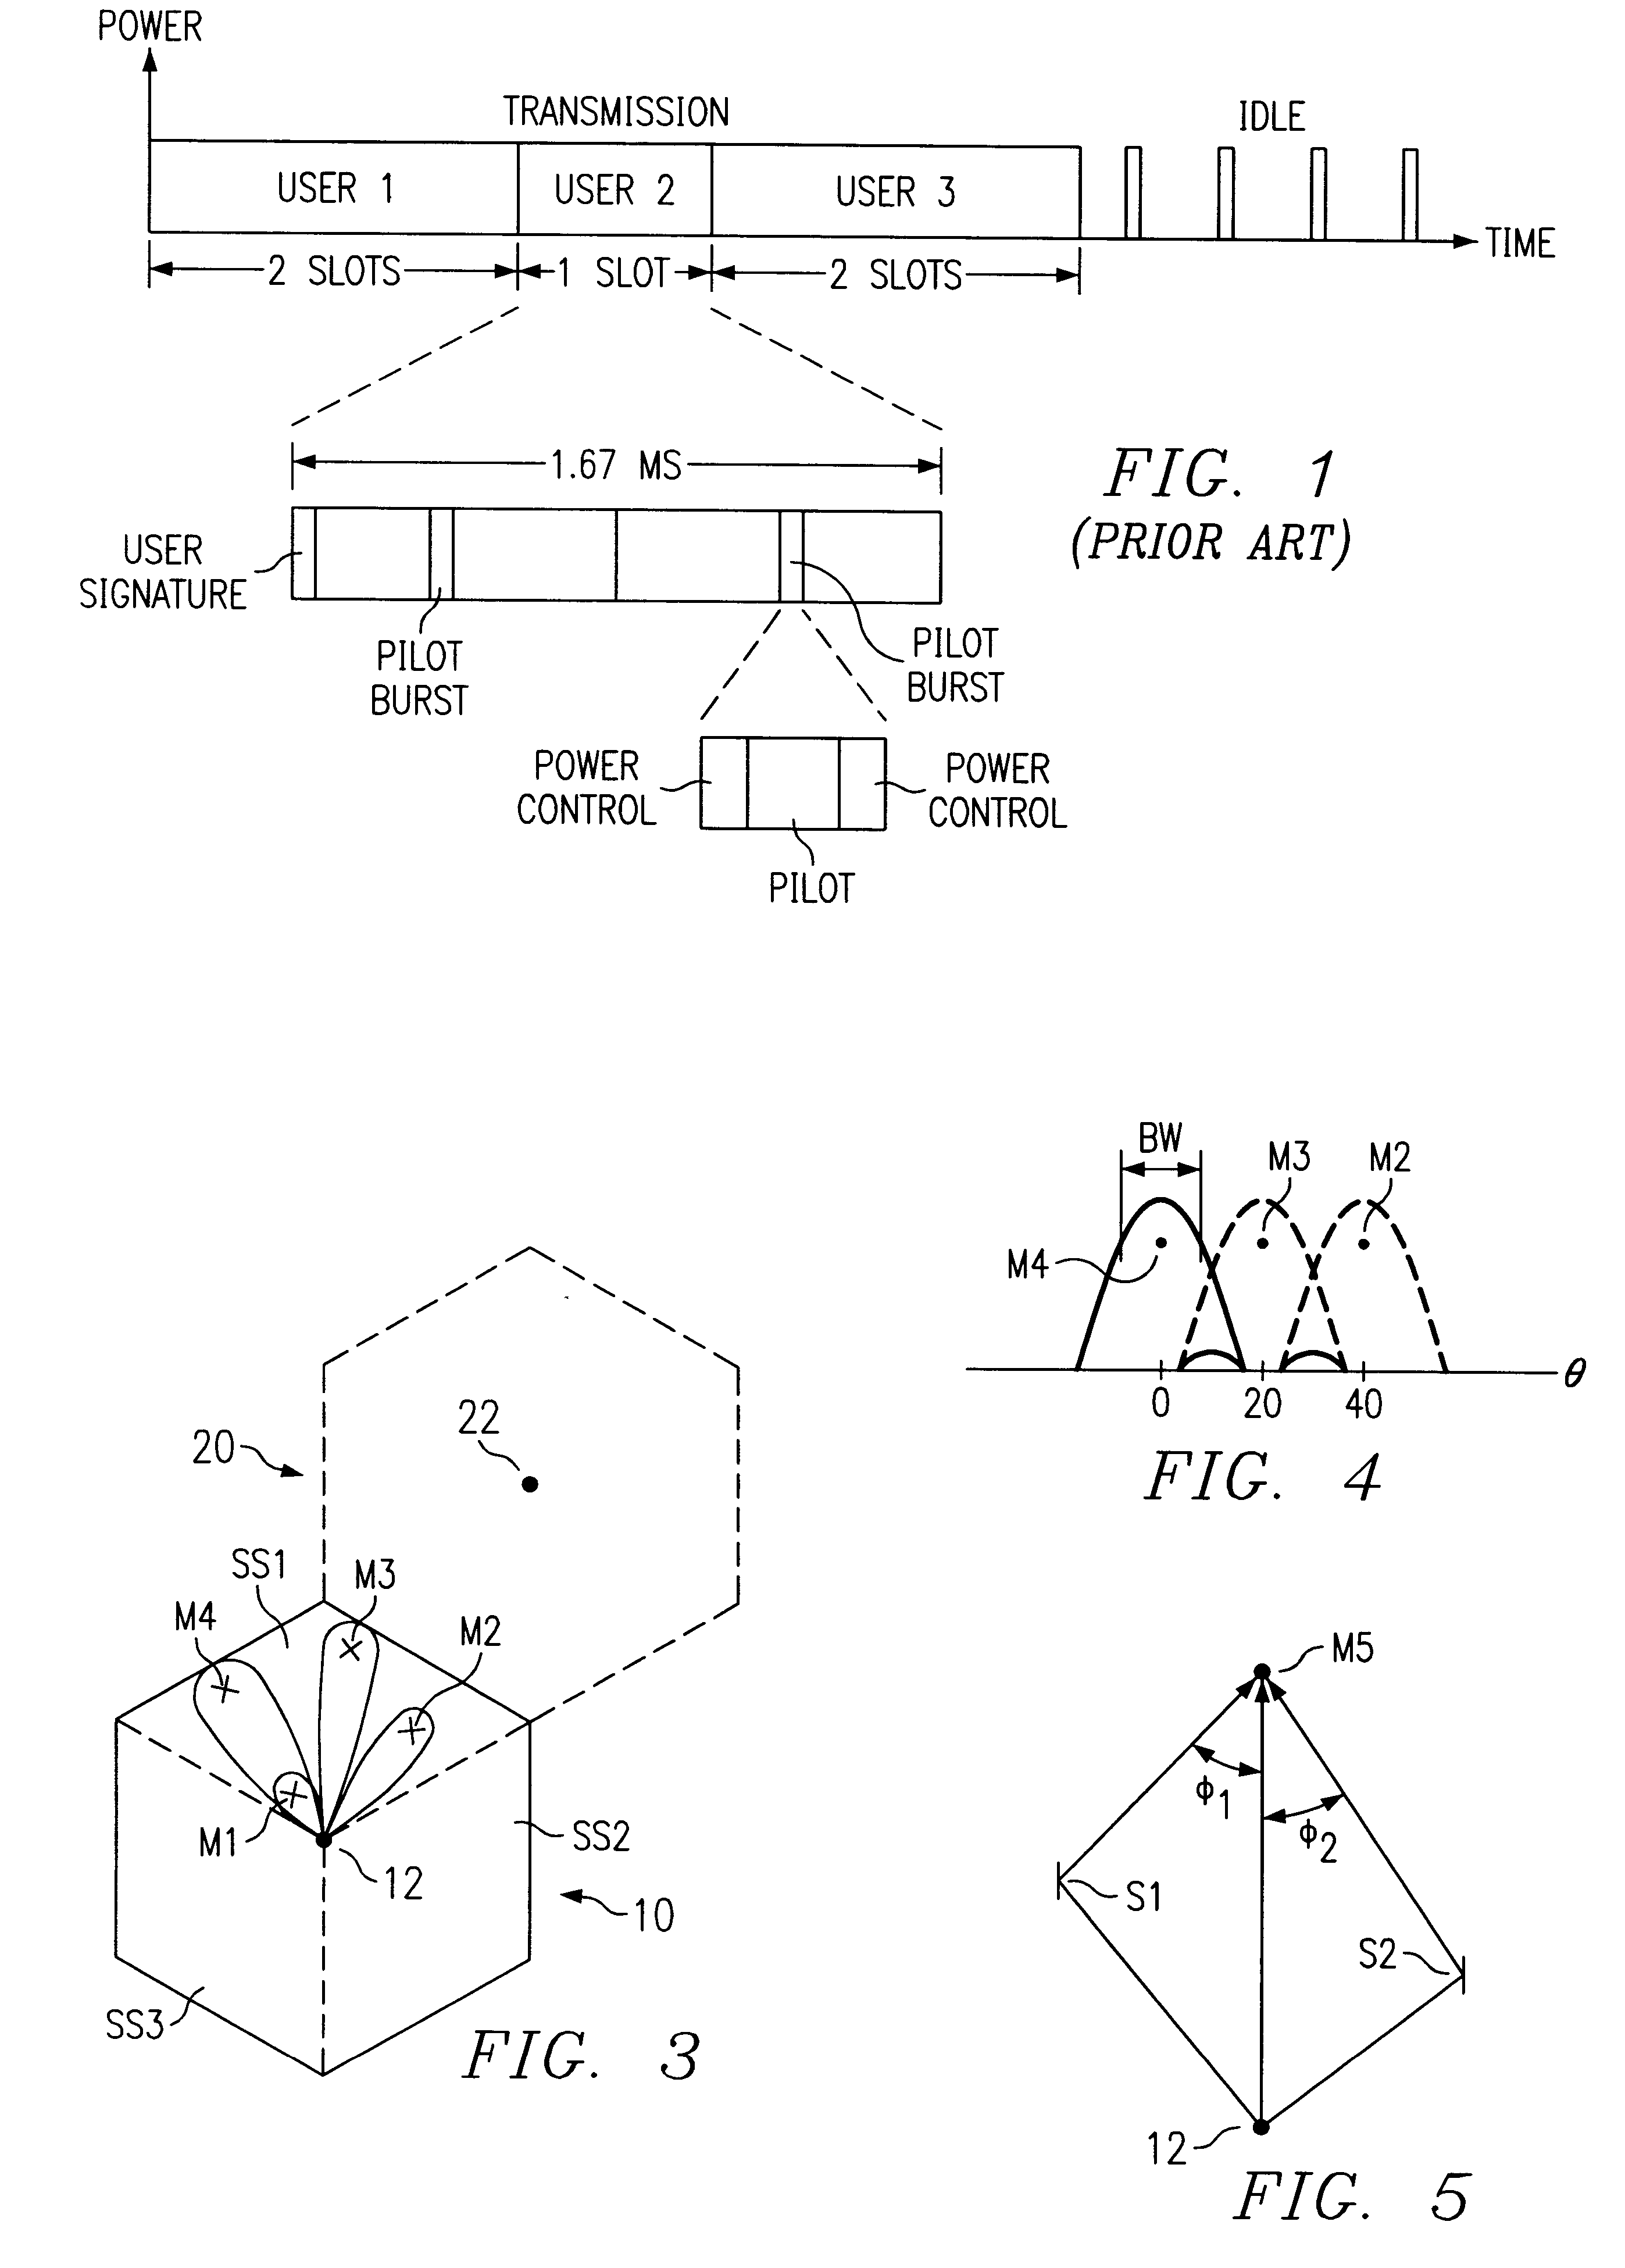 Simultaneous forward link beam forming and learning method for mobile high rate data traffic